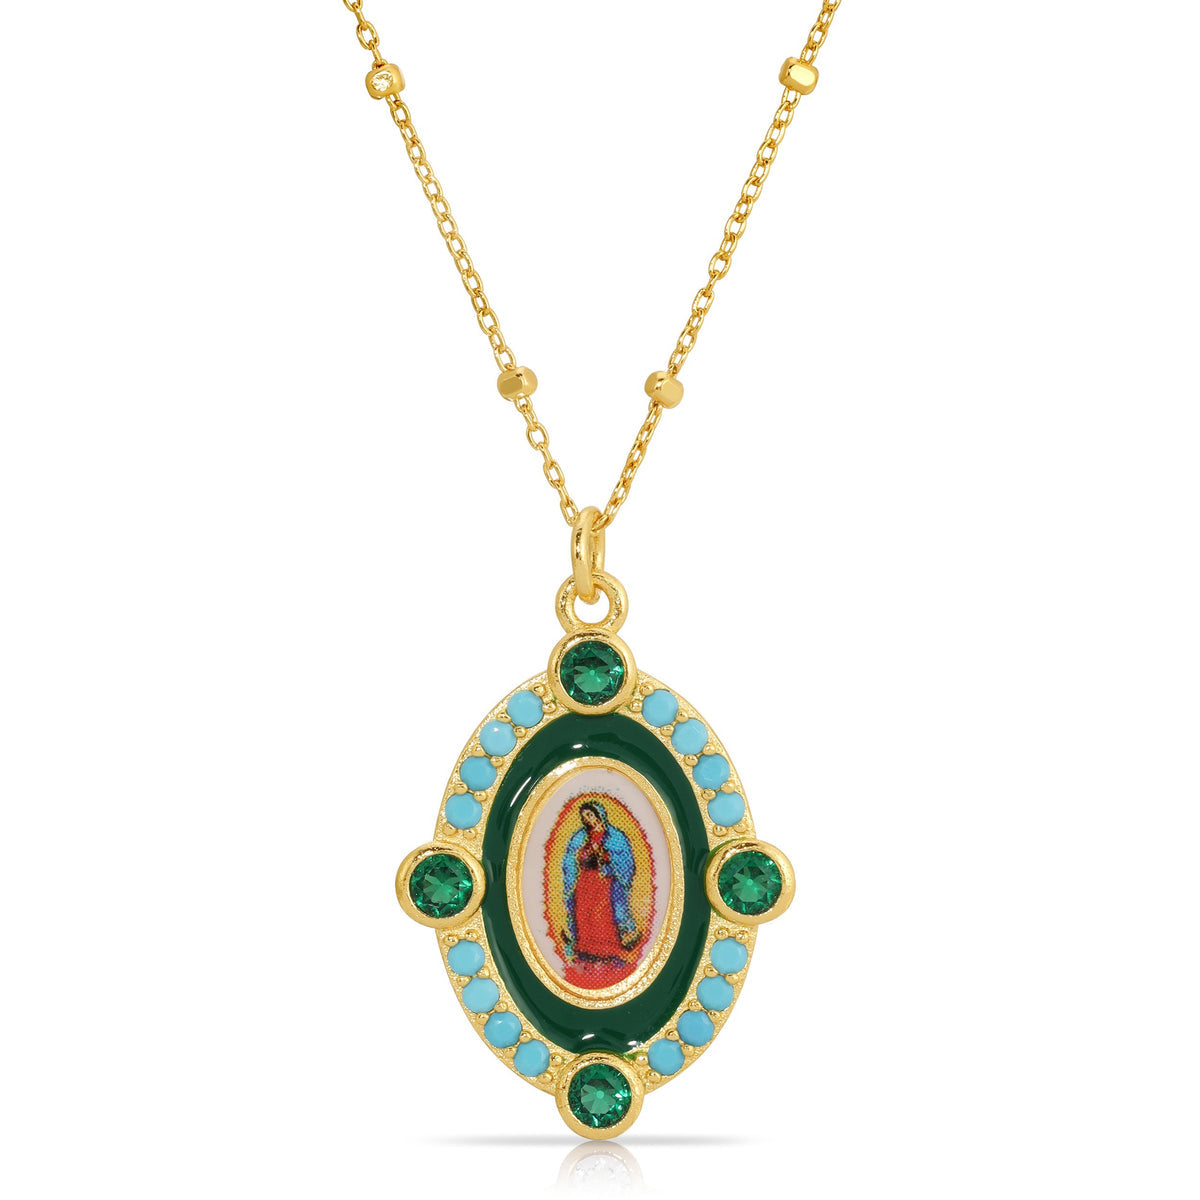 Necklace - Our Lady of Guadalupe – Twelfth and Blossom